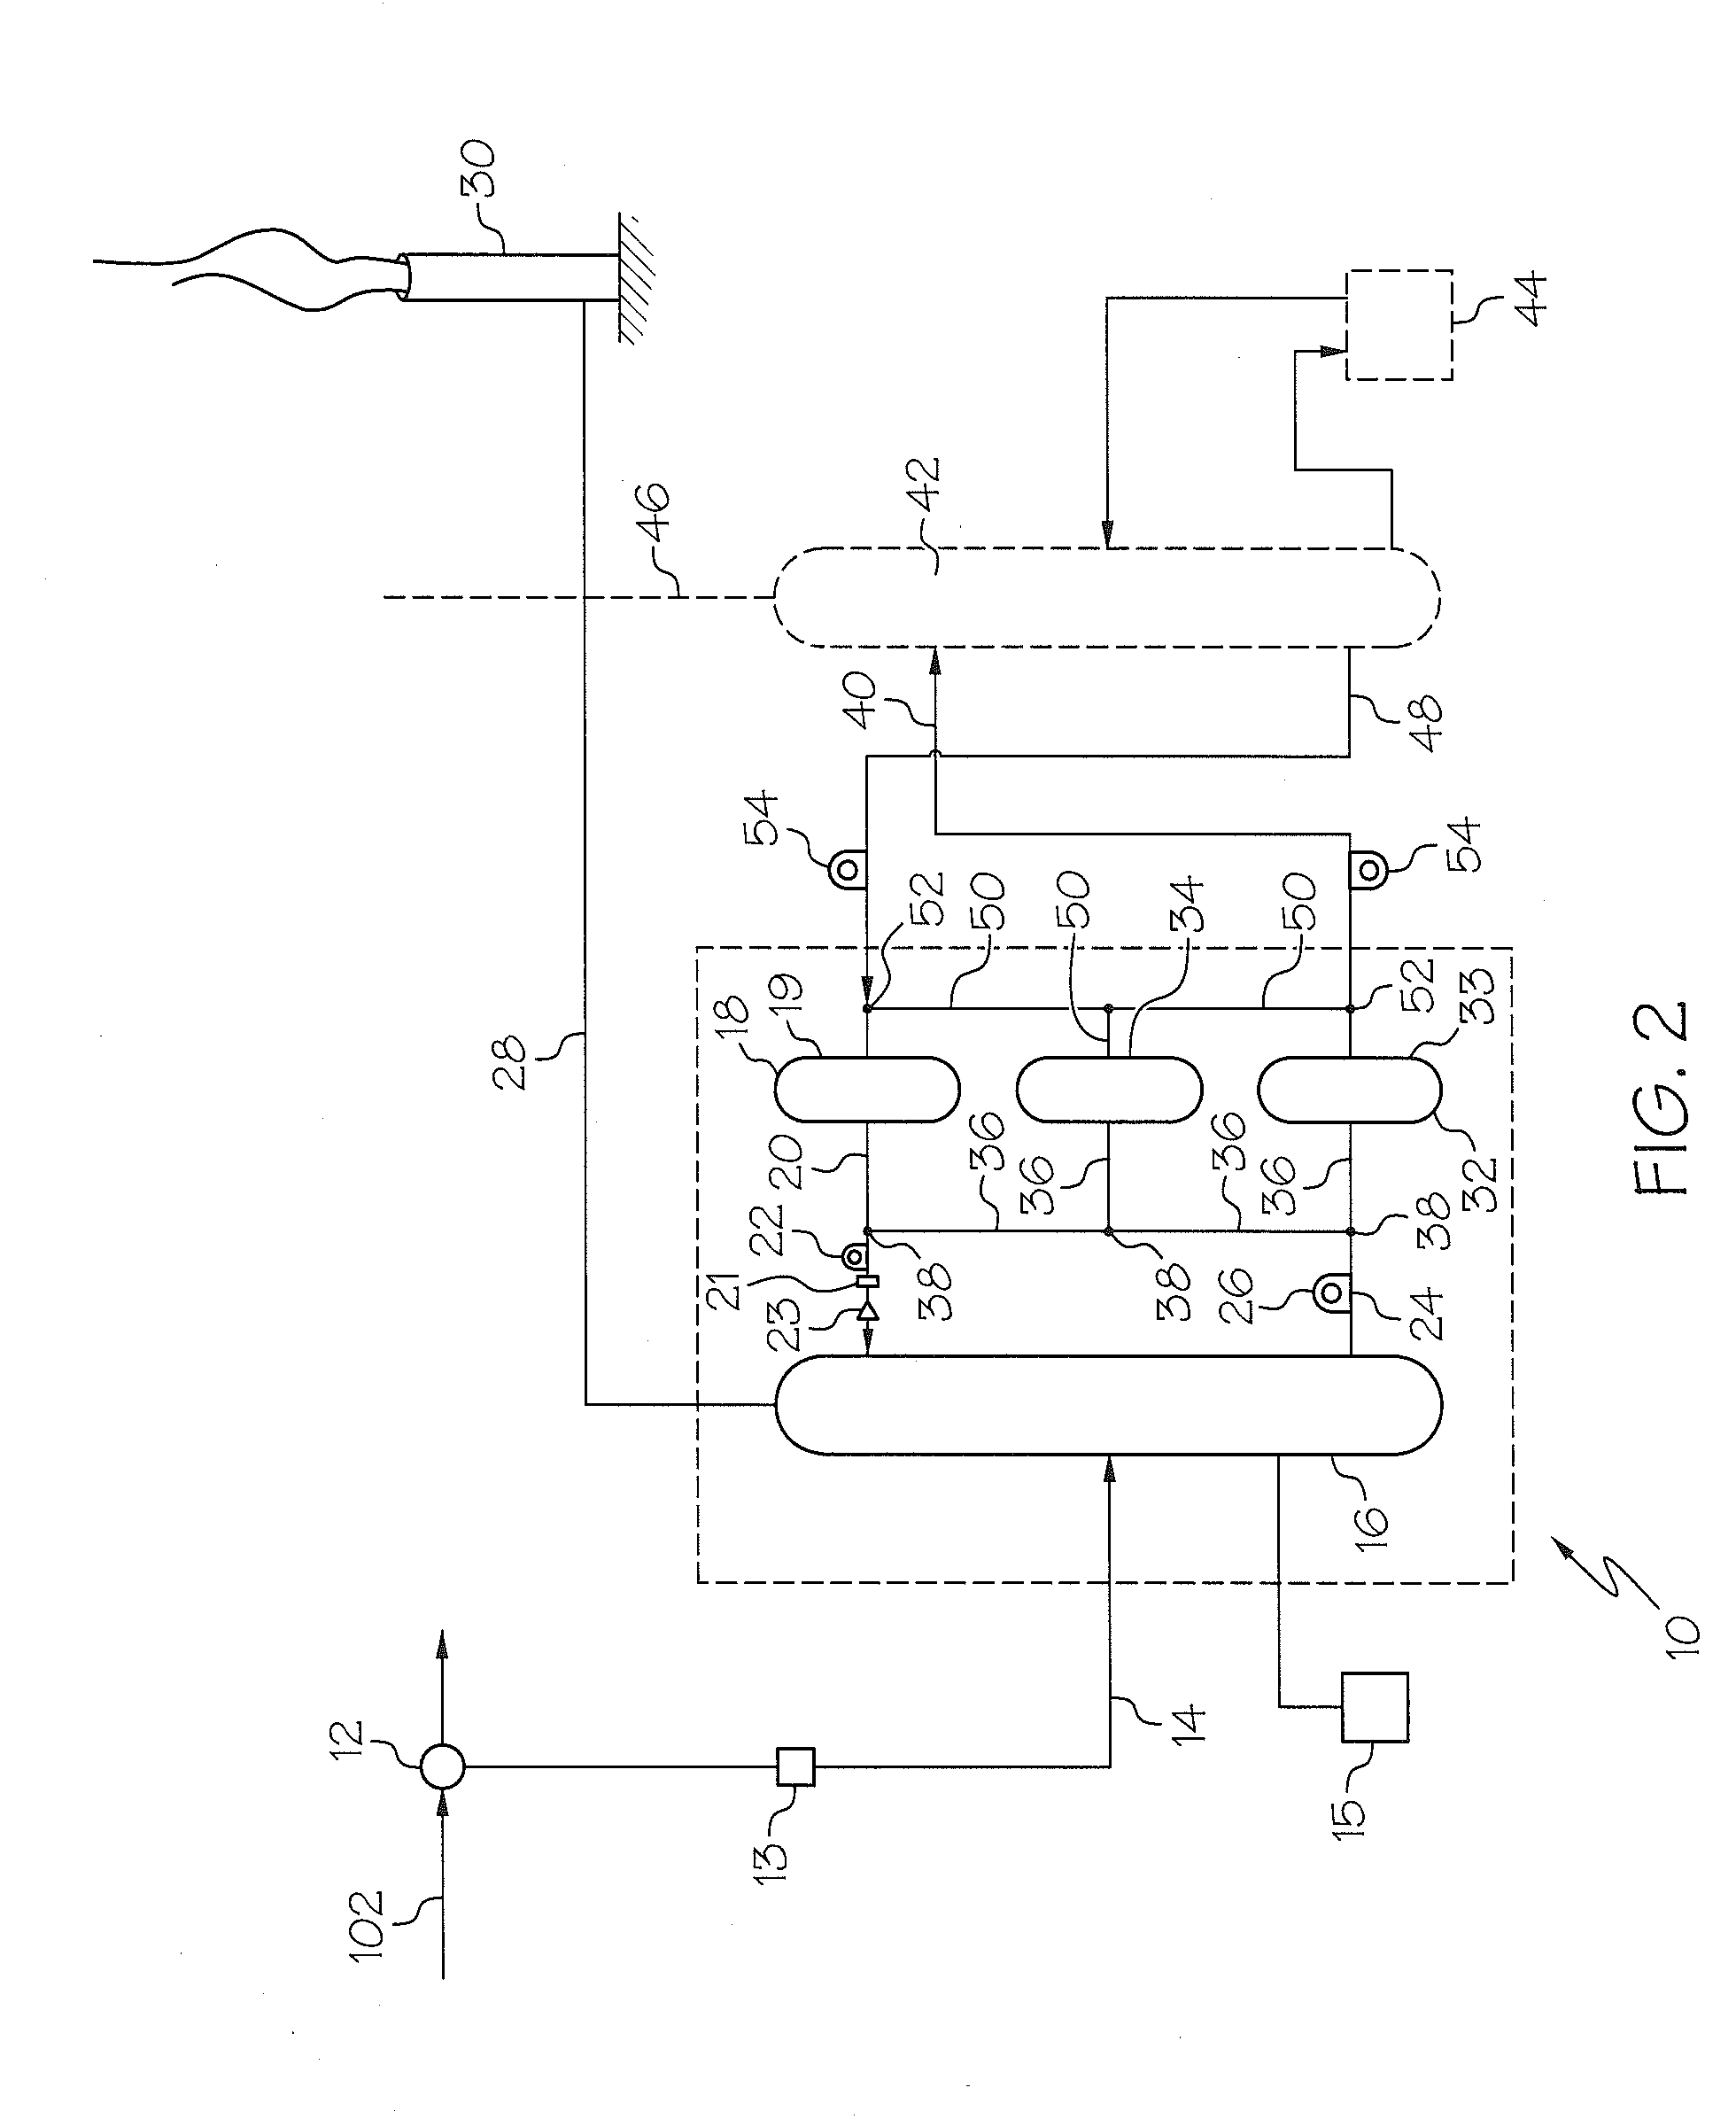 Auxiliary acid and sour gas treatment system and method